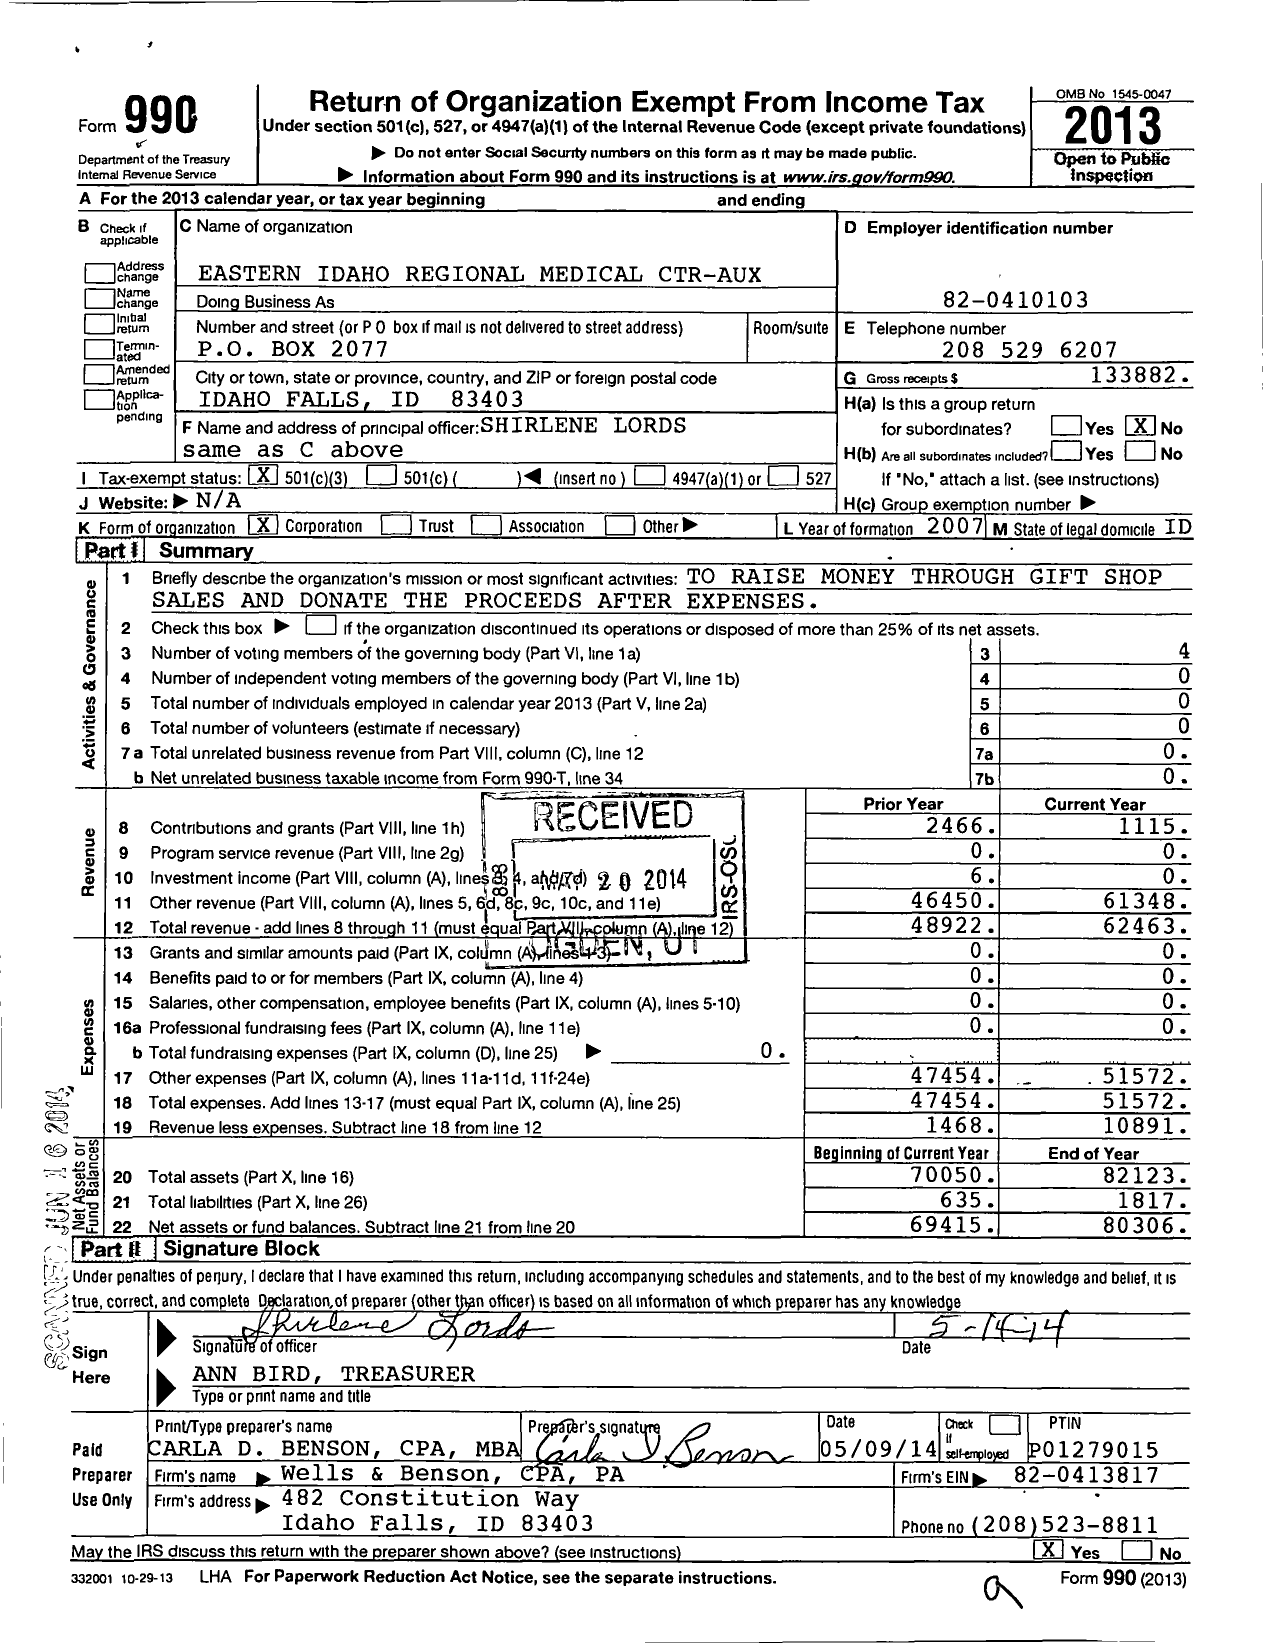 Image of first page of 2013 Form 990 for Eastern Idaho Regional Medical Center Auxiliary